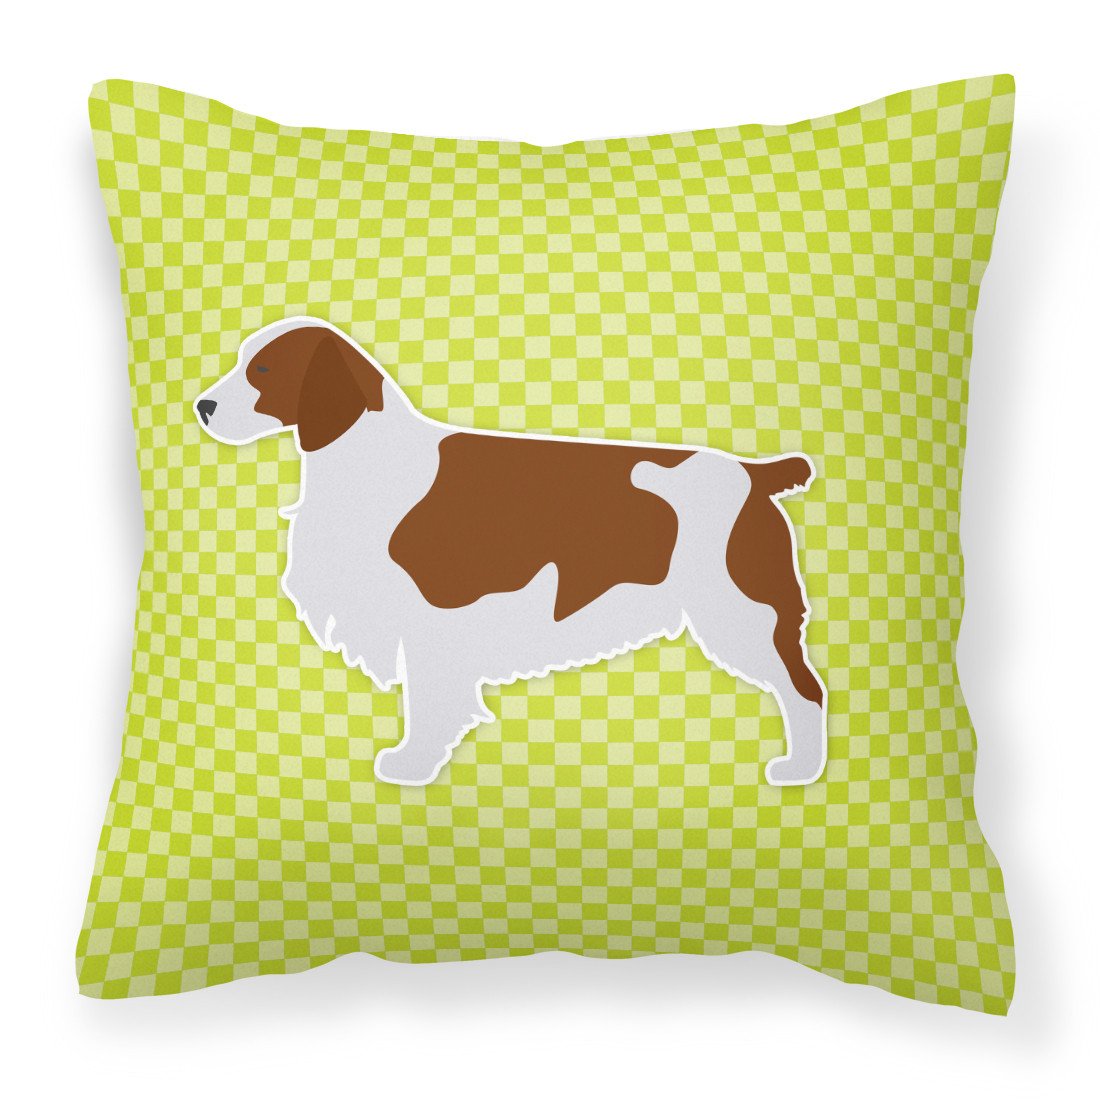 Welsh Springer Spaniel Checkerboard Green Fabric Decorative Pillow BB3800PW1818 by Caroline's Treasures